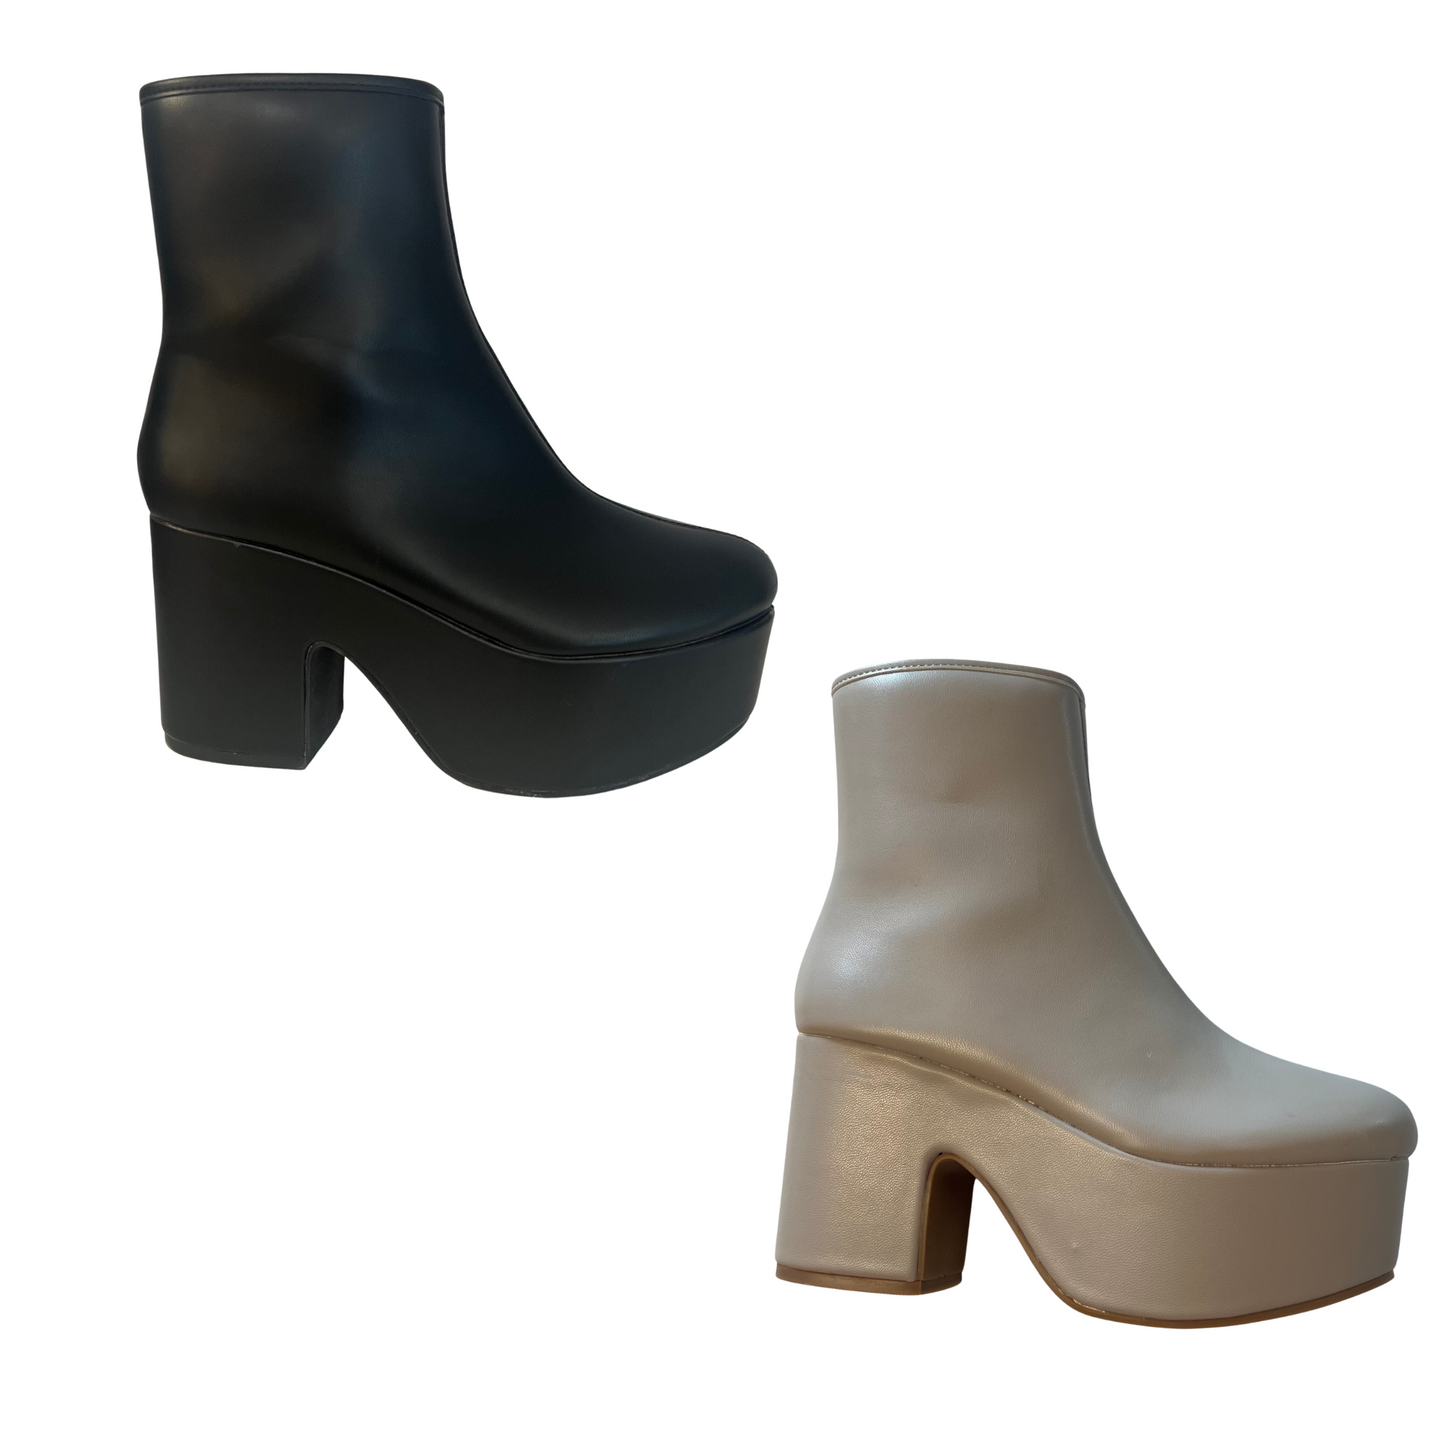 The Xiva by Shushop features a platform bootie that stands out in any outfit. Its durable construction ensures long-lasting comfort, and the zip up design ensures a secure fit for all-day use. Whether you're looking for a stylish statement or a comfortable everyday shoe, the Xiva checks all the boxes.